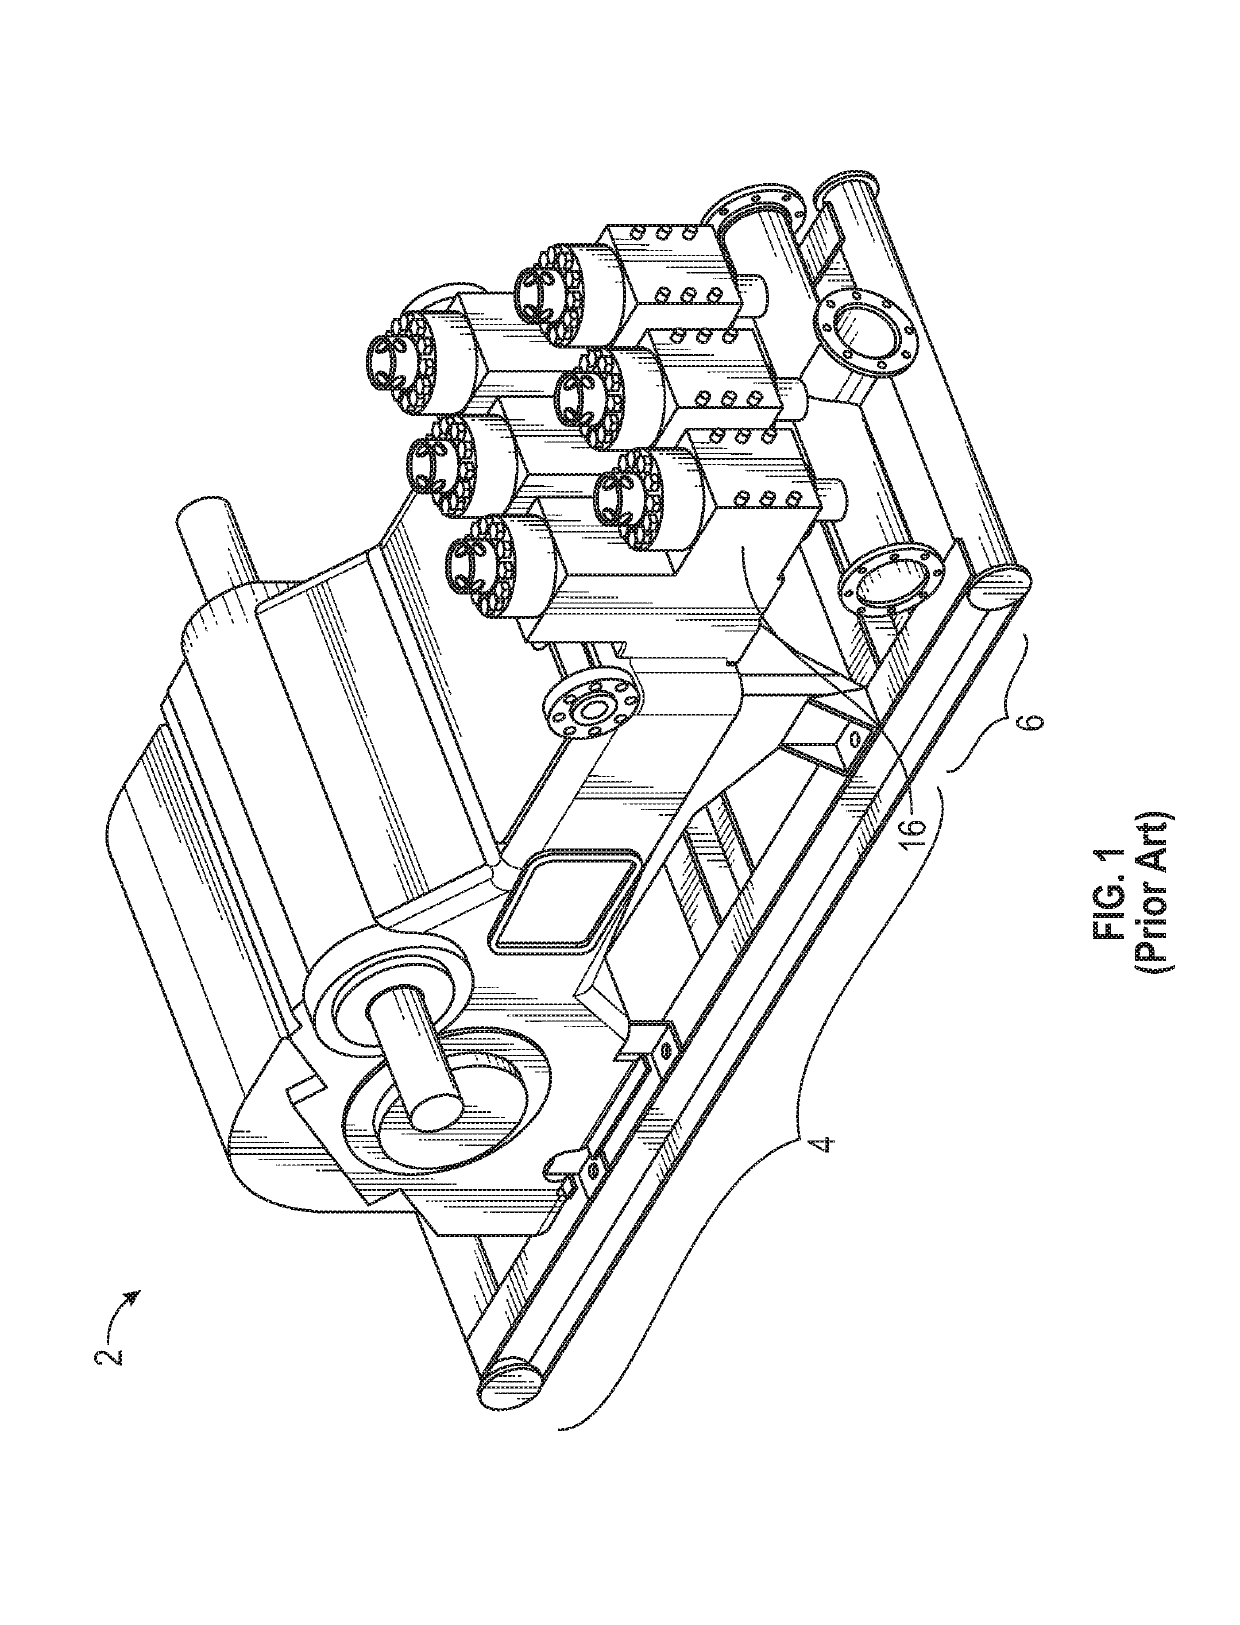 Cylinder liner retainer system with torque multiplier and method